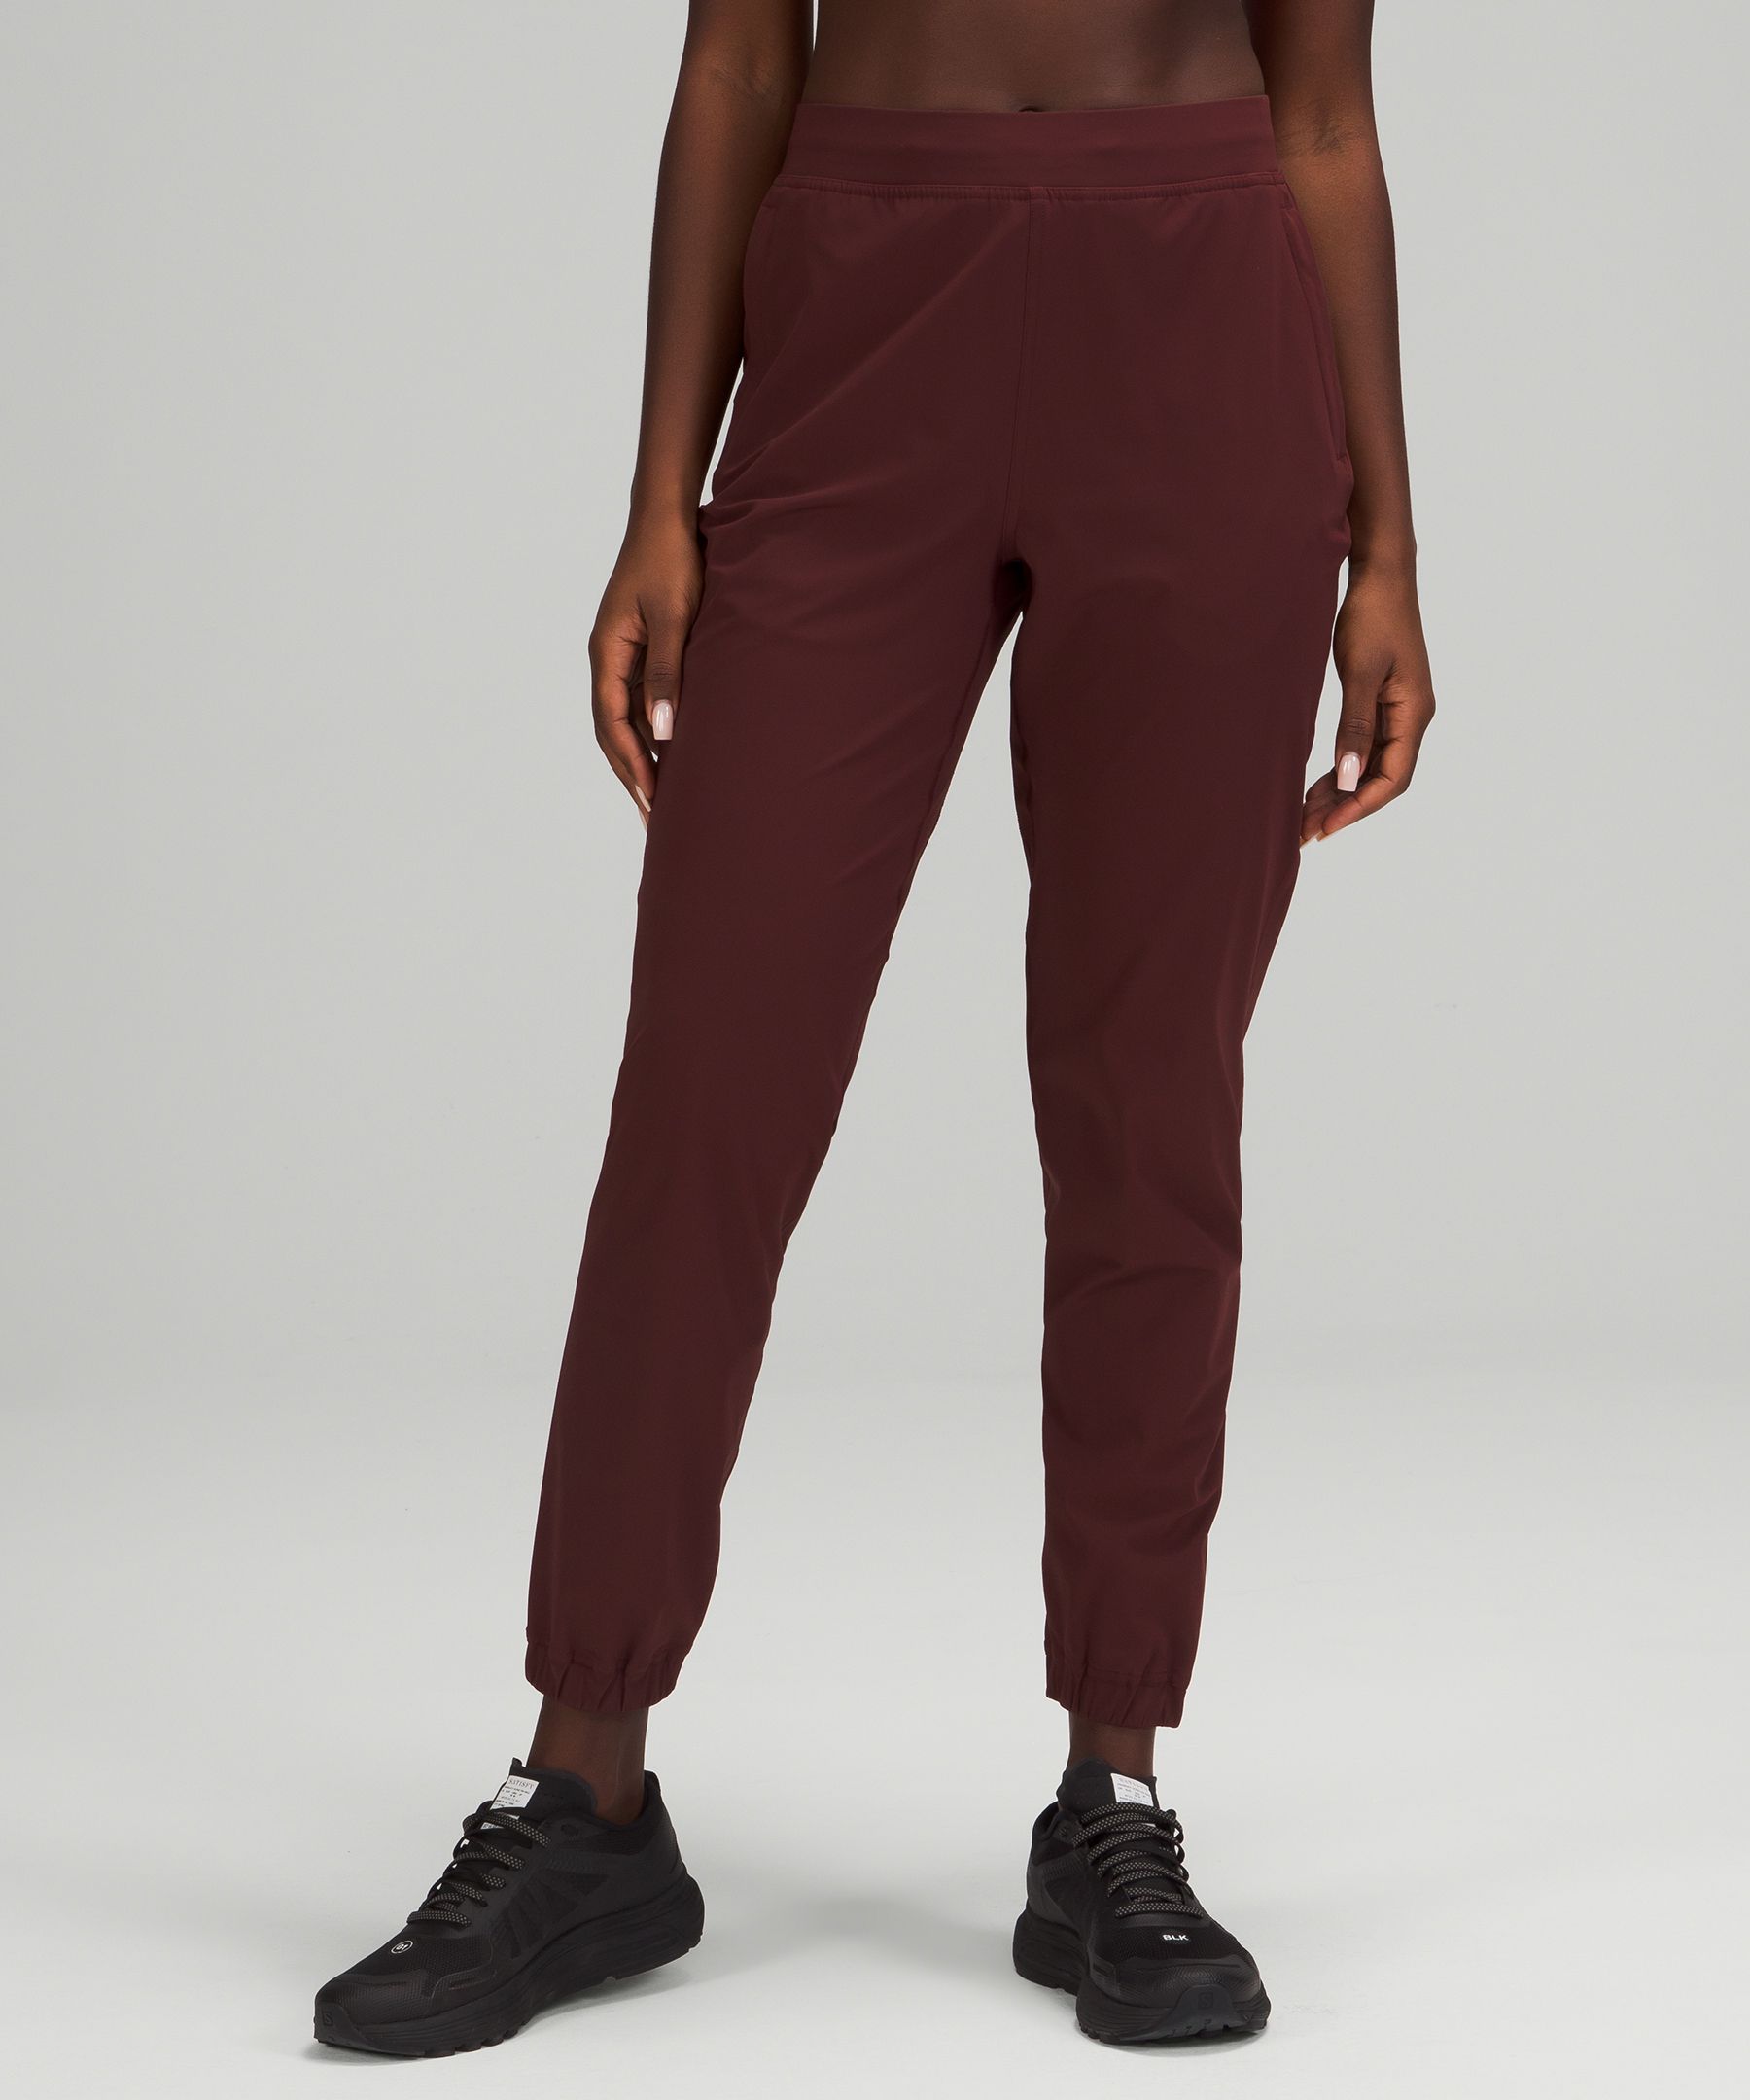 Lululemon Adapted State High-rise Joggers 28" In Red Merlot